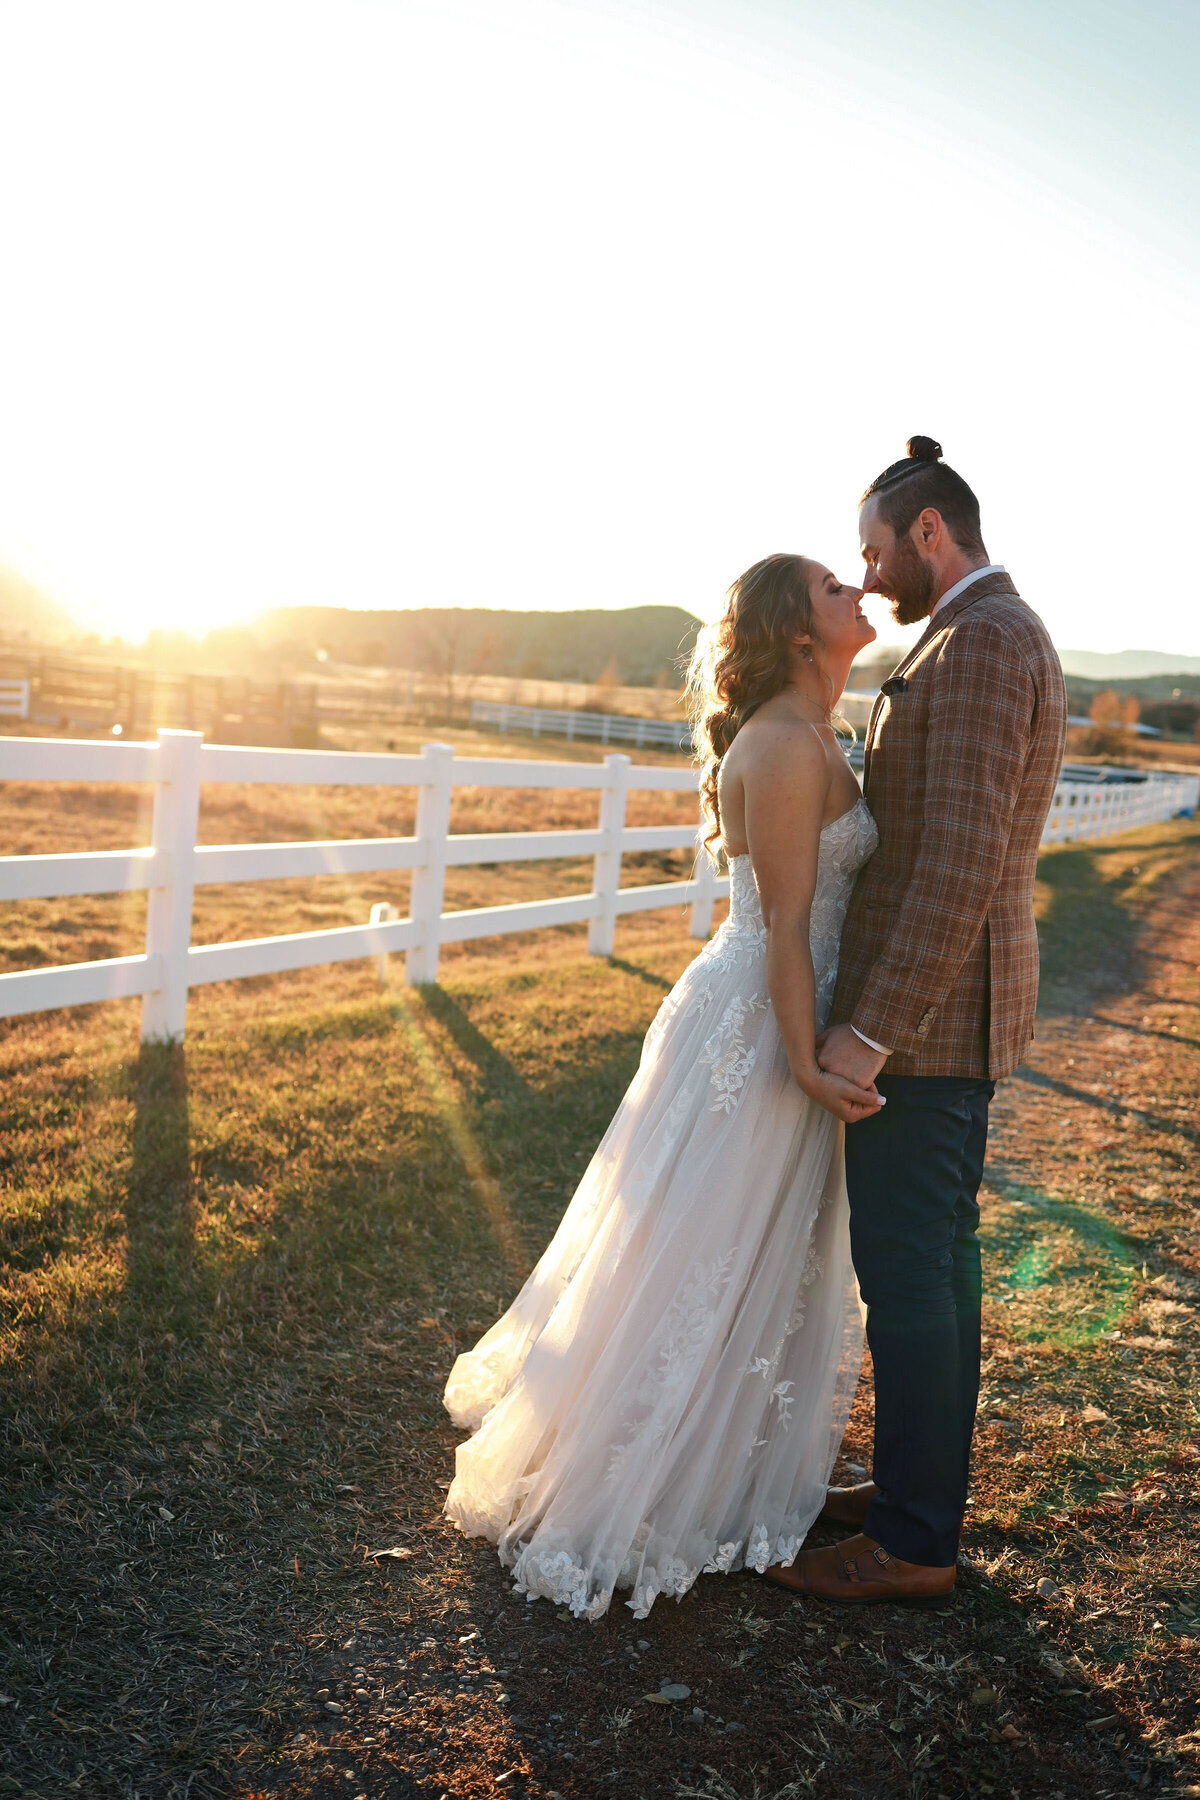 A golden hour moment between a bride and groom, dancing in the light and smiling at each other,